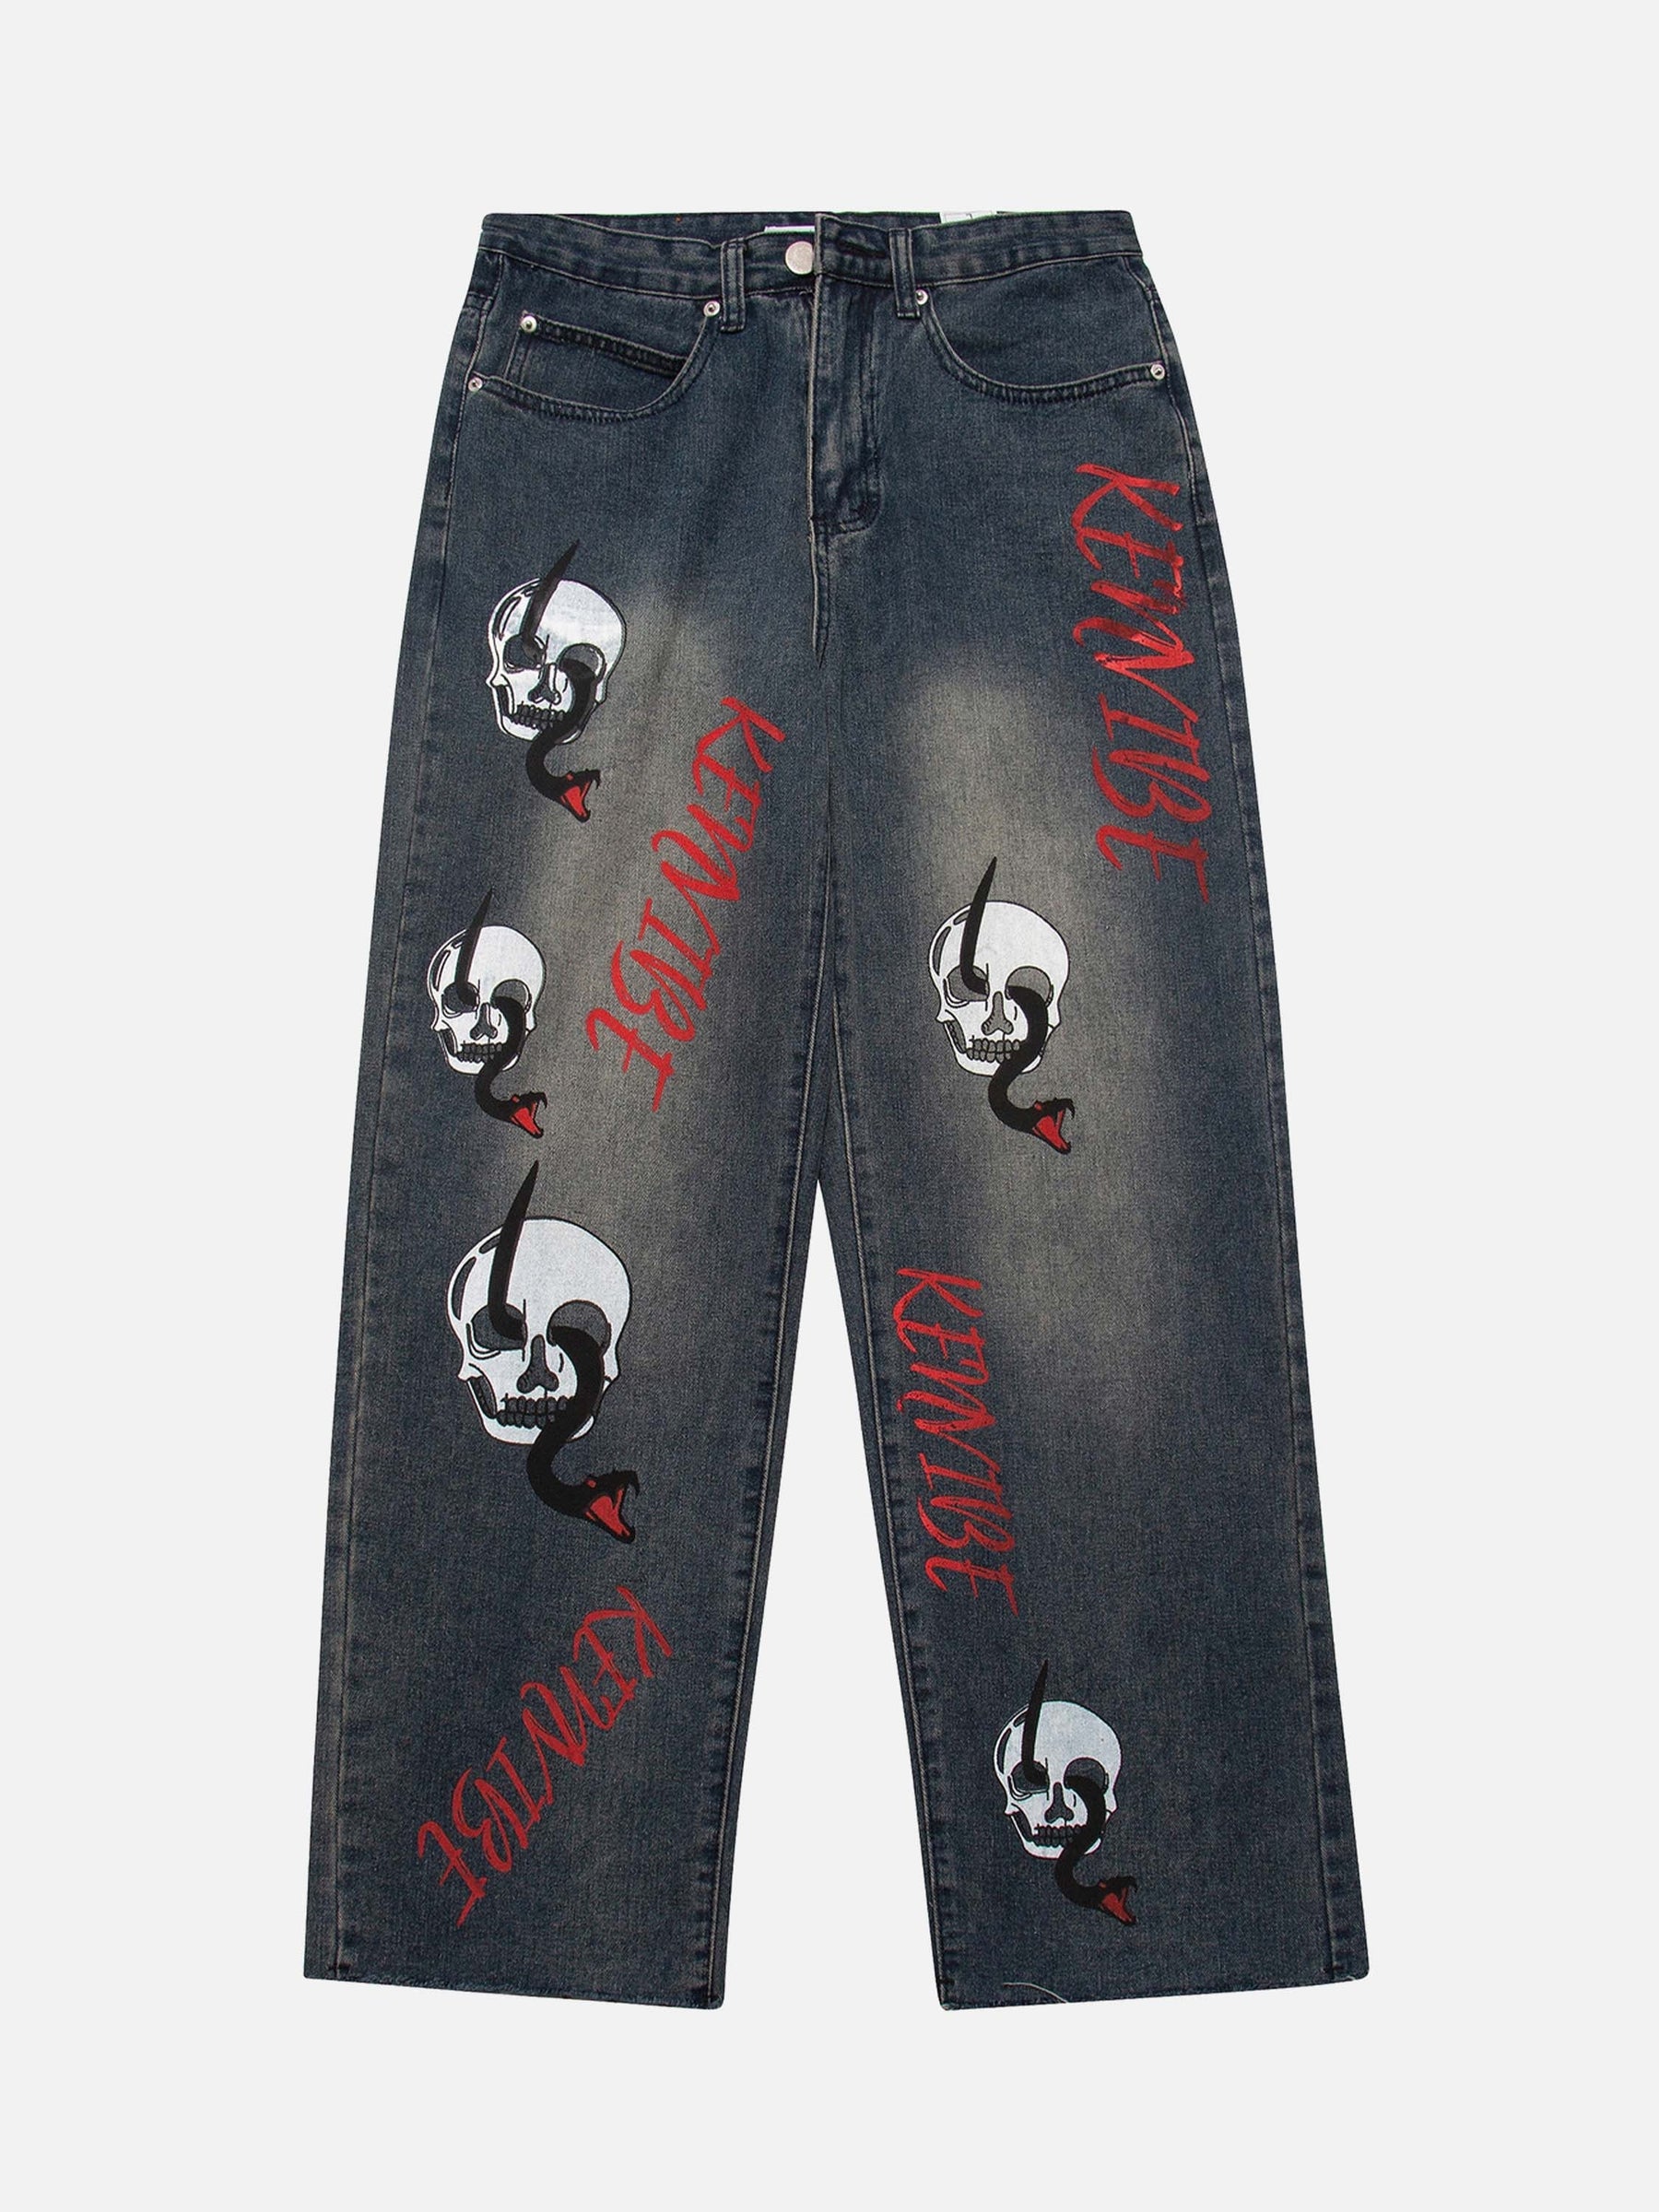 LUXENFY™ - Skull Letter Embroidery Jeans luxenfy.com